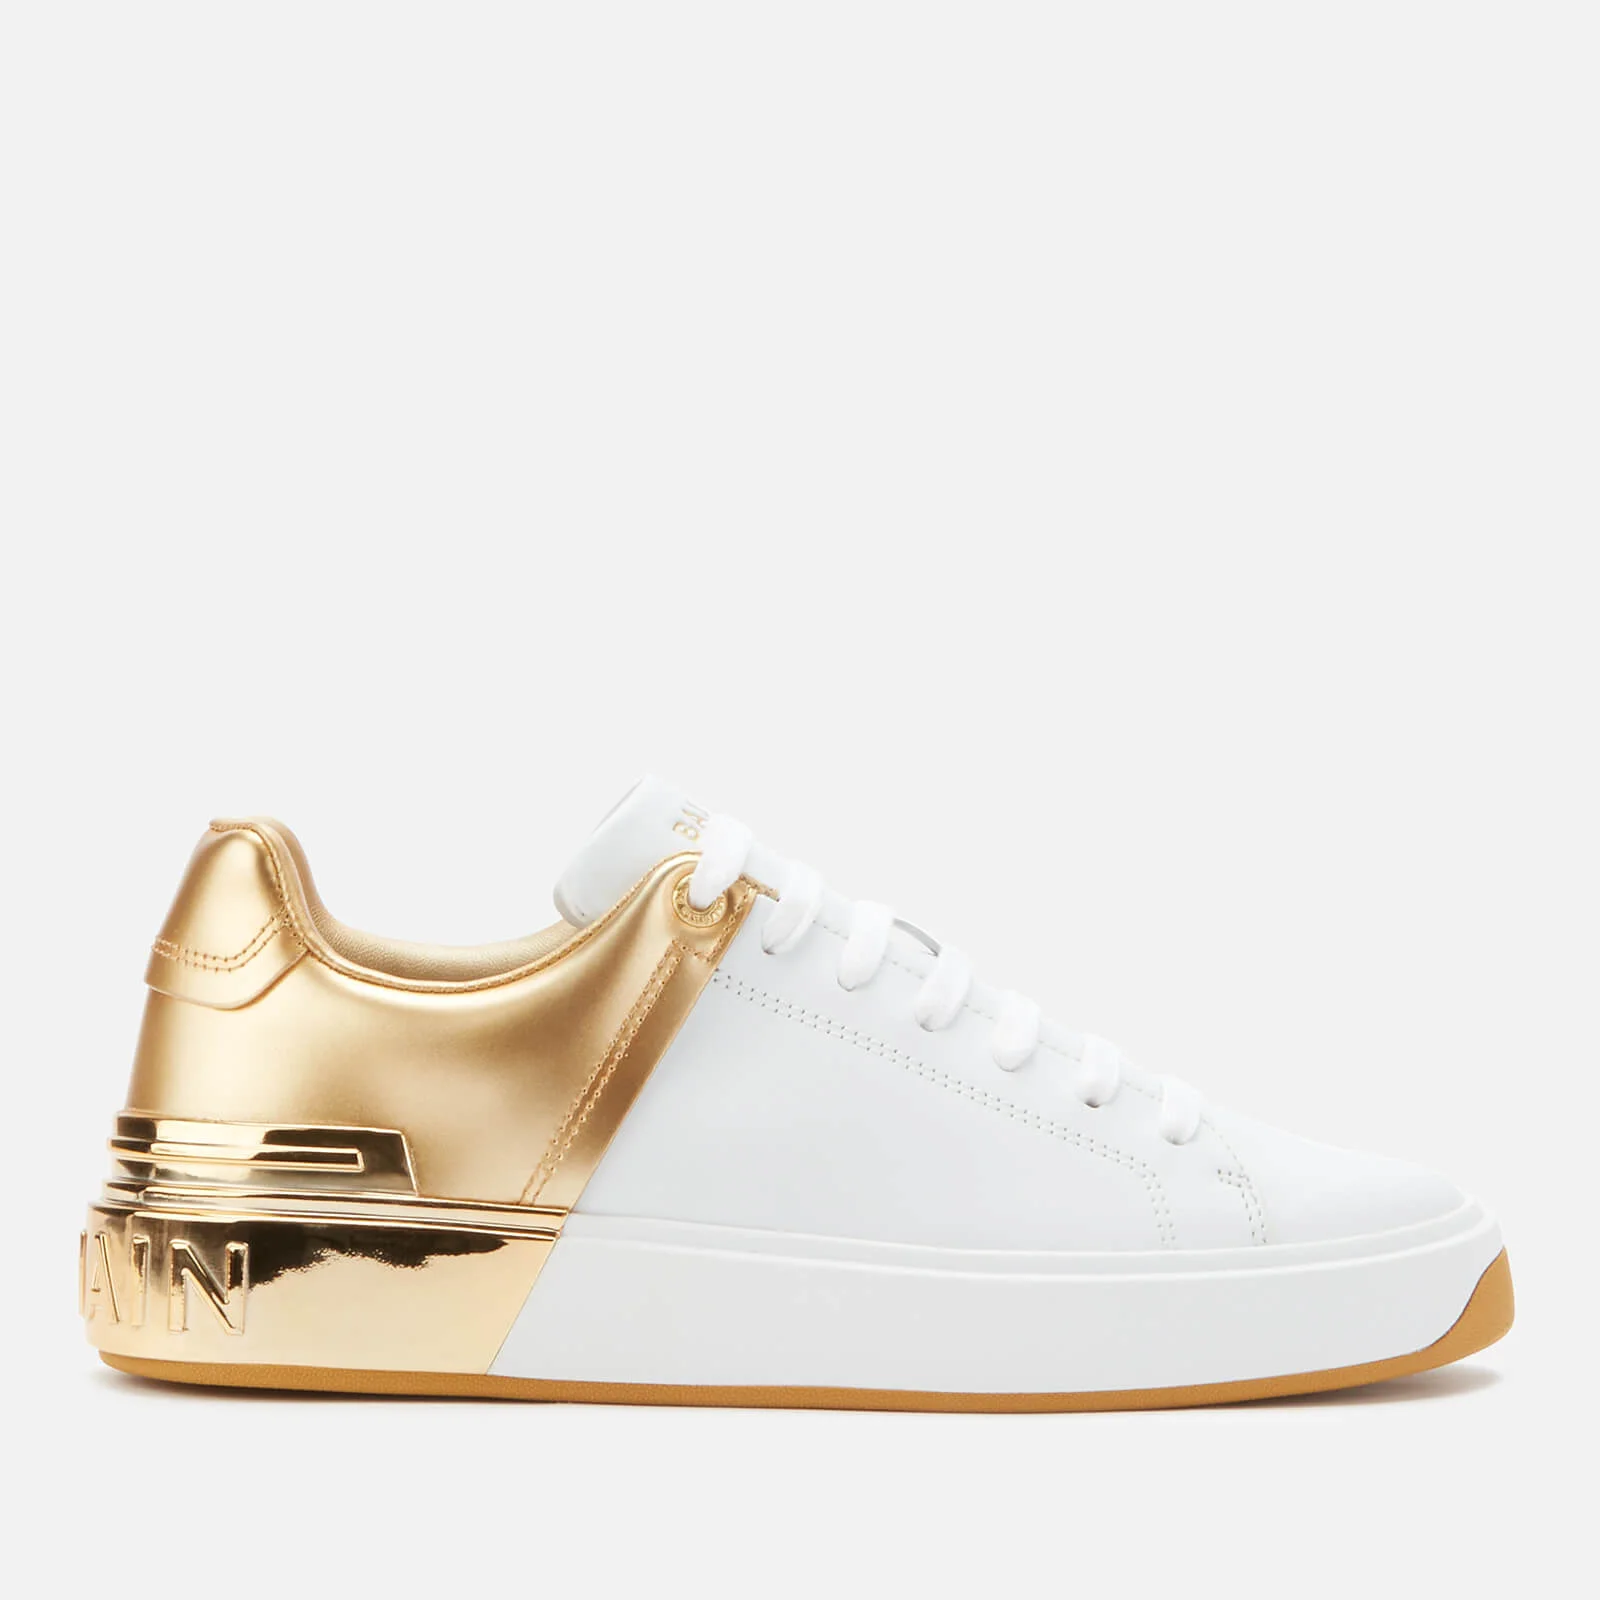 Balmain Women's B-Court Leather/Mirror Low Top Trainers - White/Gold Image 1